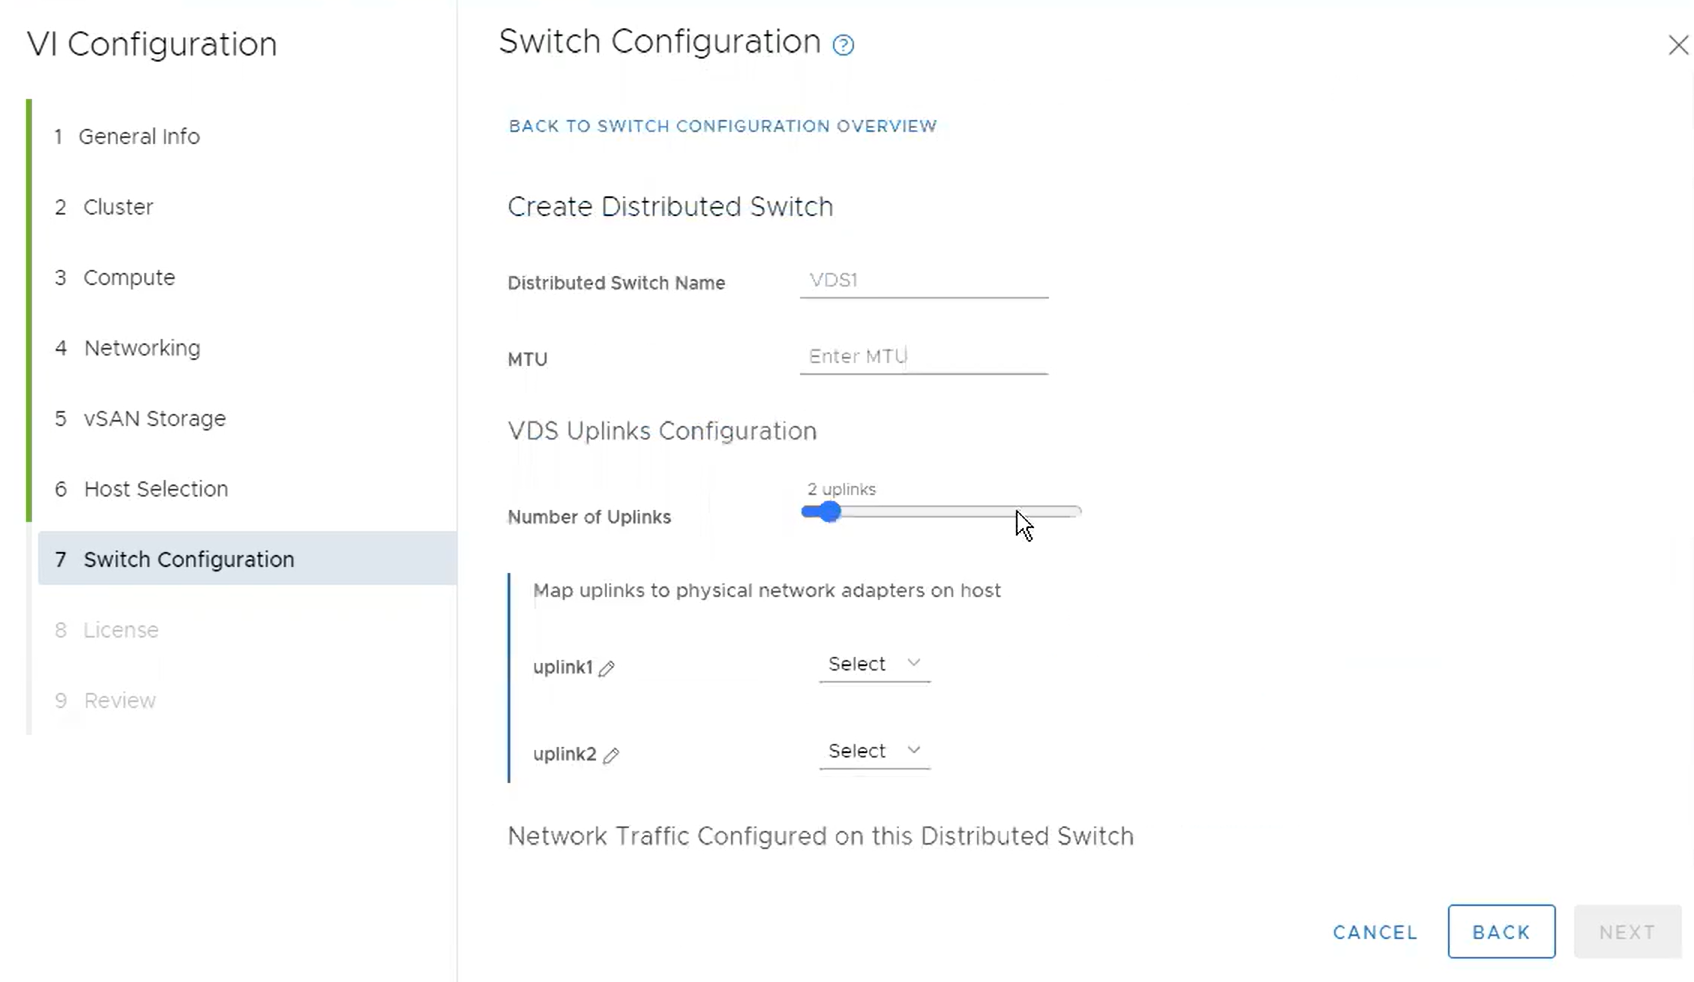 Wizard screen shows inputs for options for Creating Distributed switch name, MTU, VDS Uplinks Configuration, and Network Traffic Configured